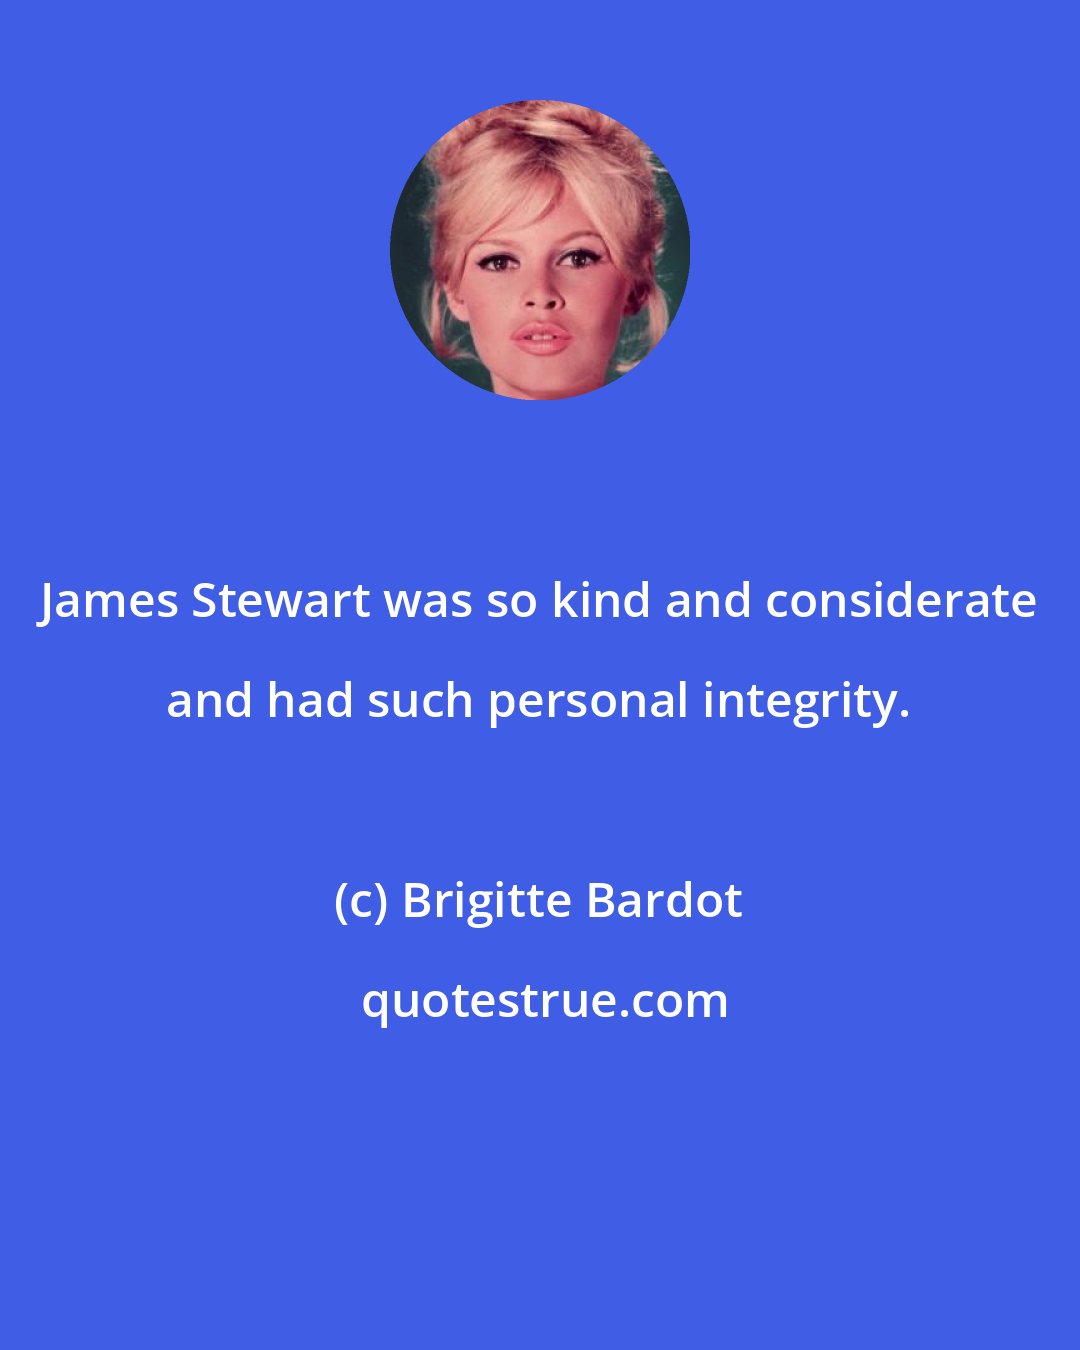 Brigitte Bardot: James Stewart was so kind and considerate and had such personal integrity.